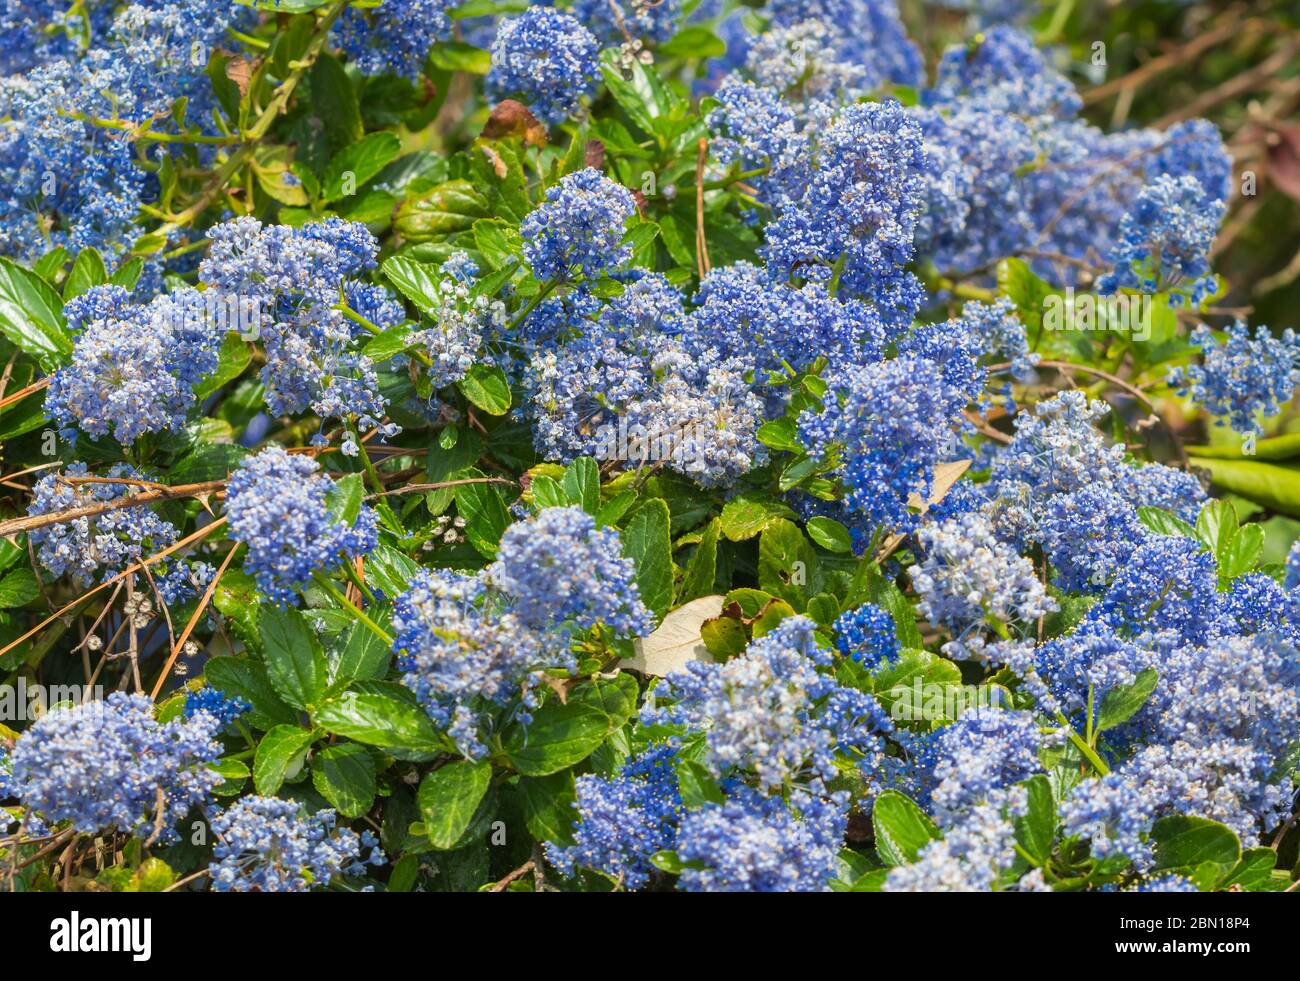 Californian lilac (Ceanothus) plant with blue flowers in Spring (May) in West Sussex, England, UK. Stock Photo